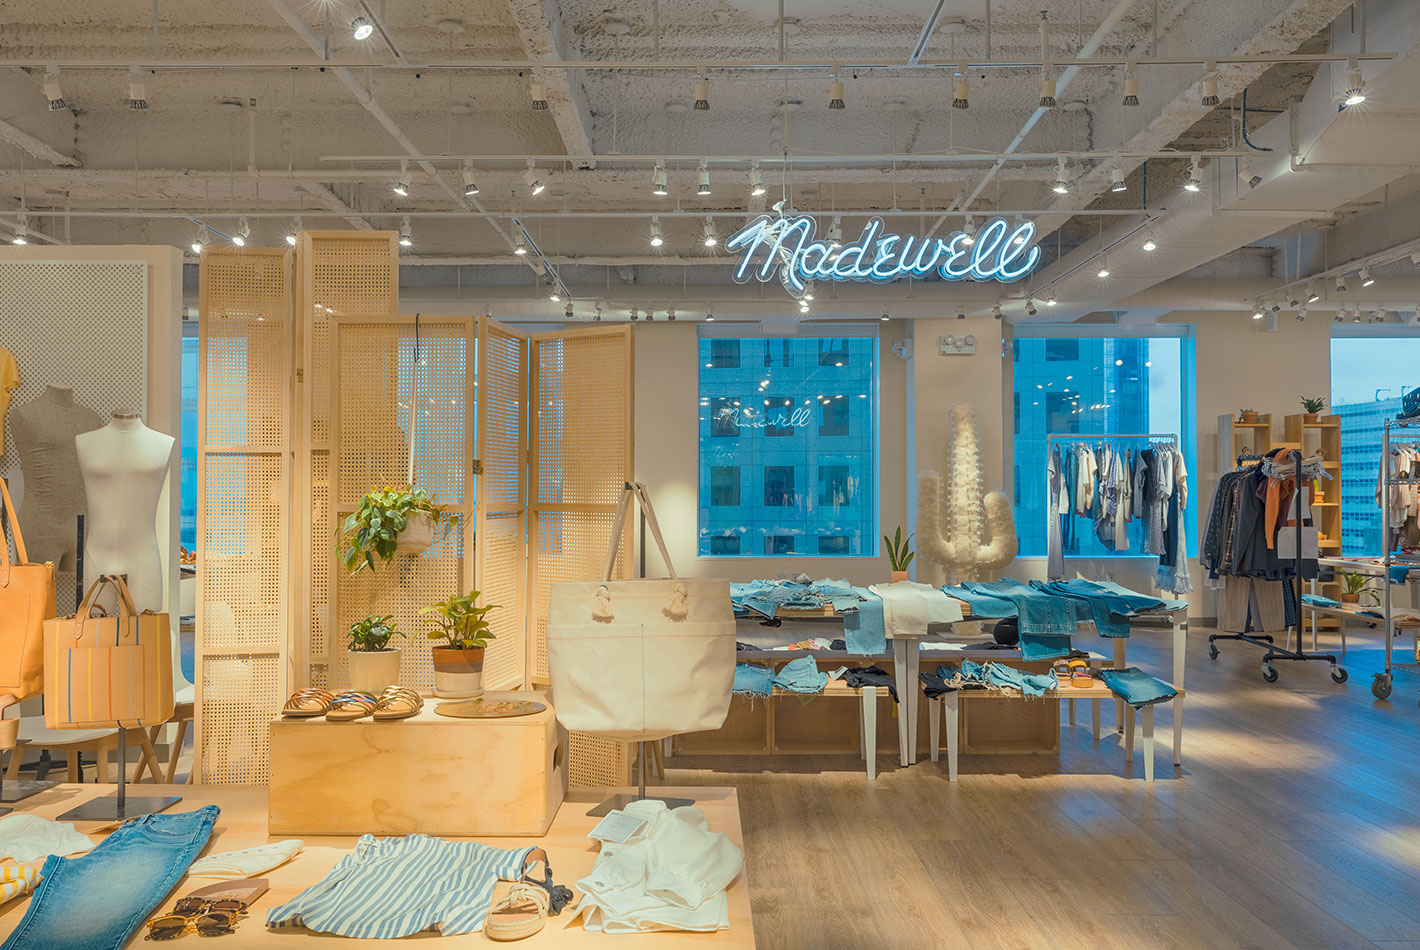 The woman's accessories area at the Madewell store in Hudson Yards features natural light from full windows and ceiling fixtures. Bleached oak floors add a natural note.